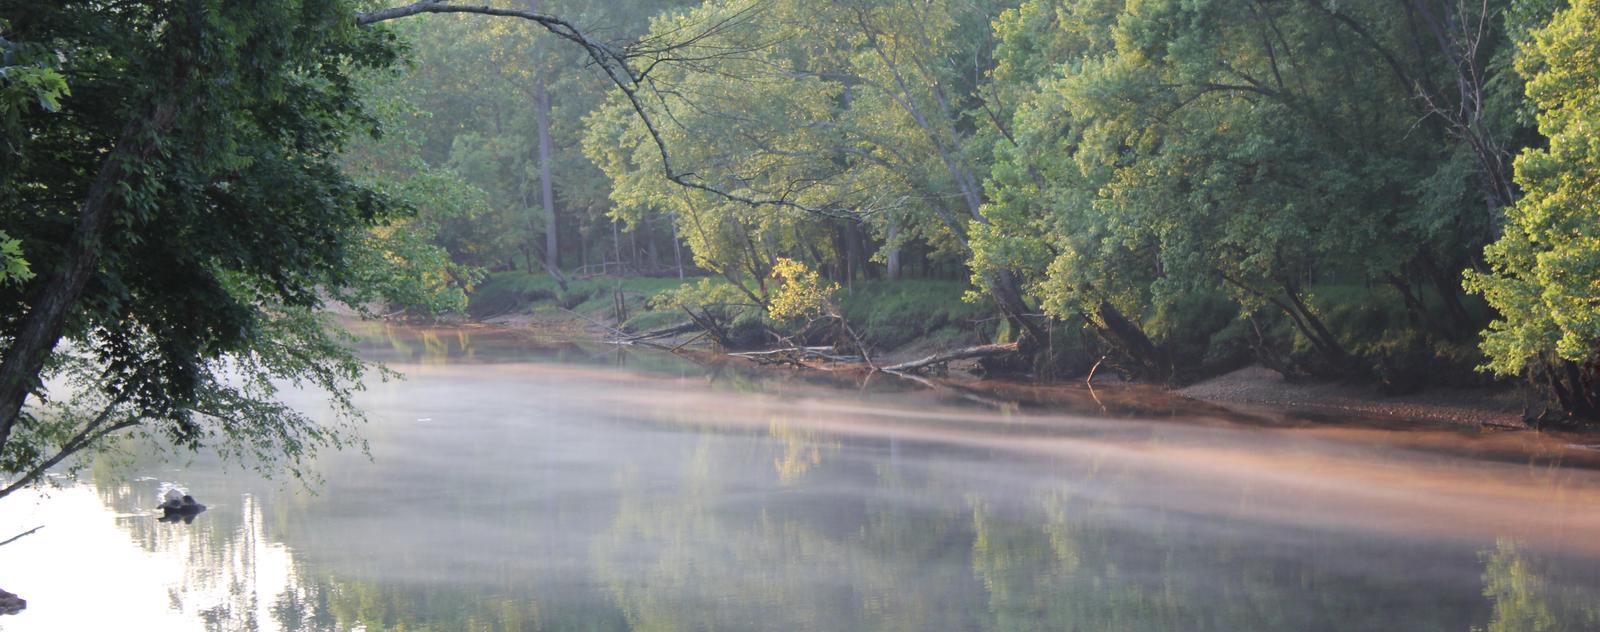 Caney Fork River at Long Branch Campground